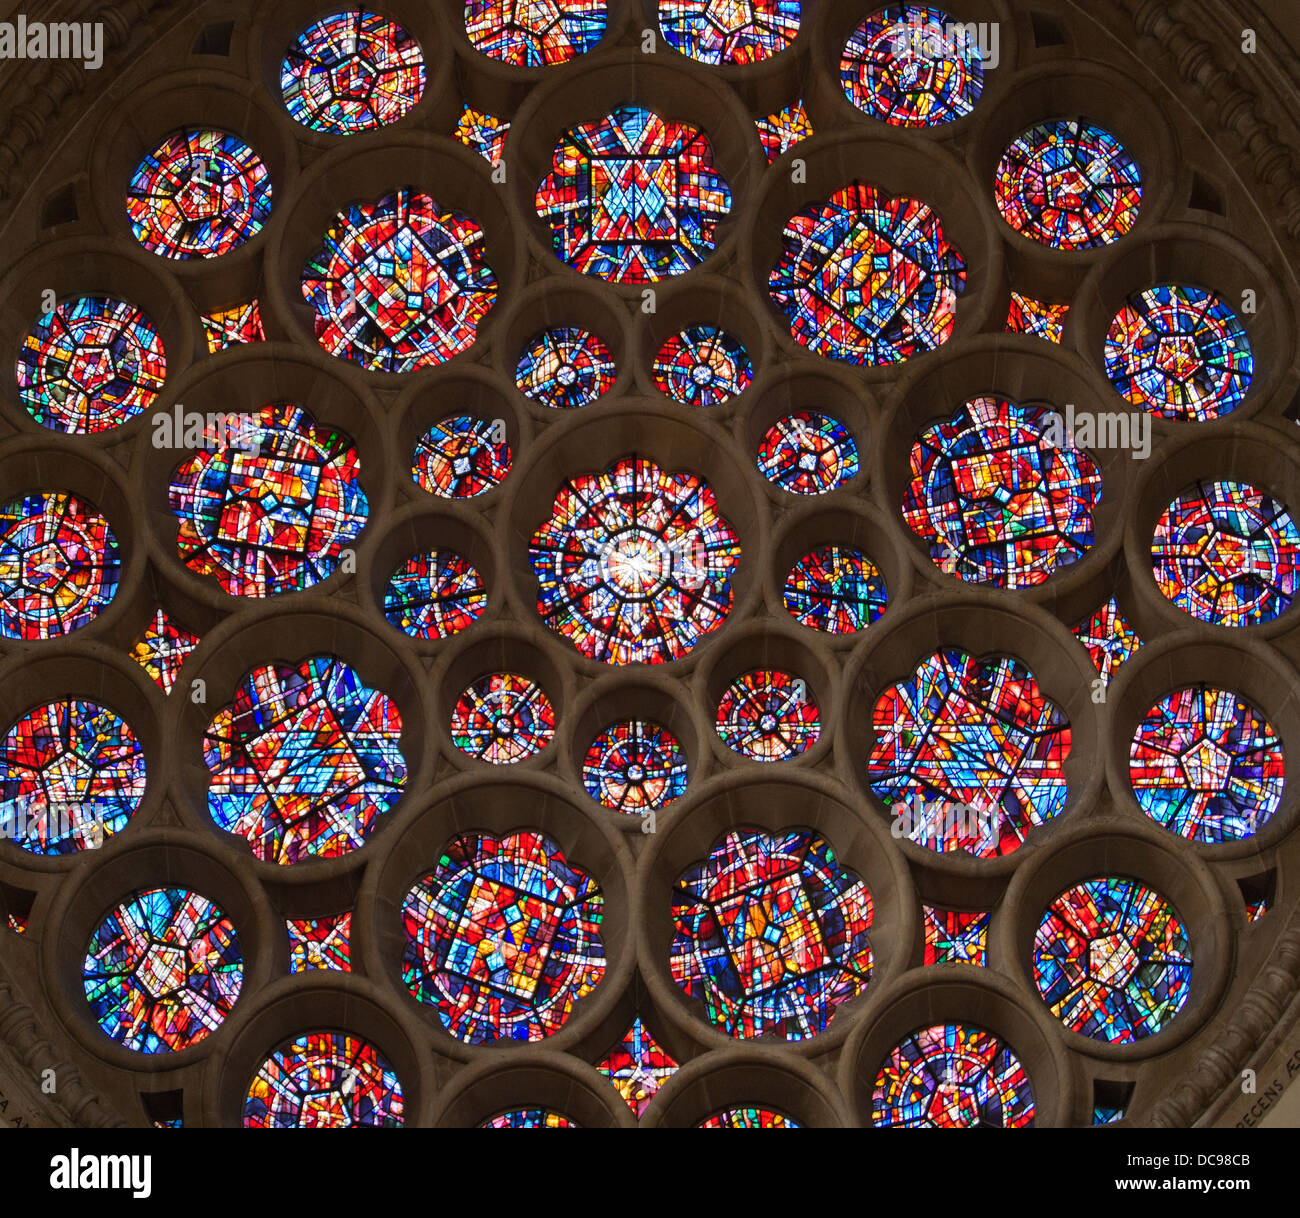 St Albans Cathedral in Hertfordshire, England - rose window in the